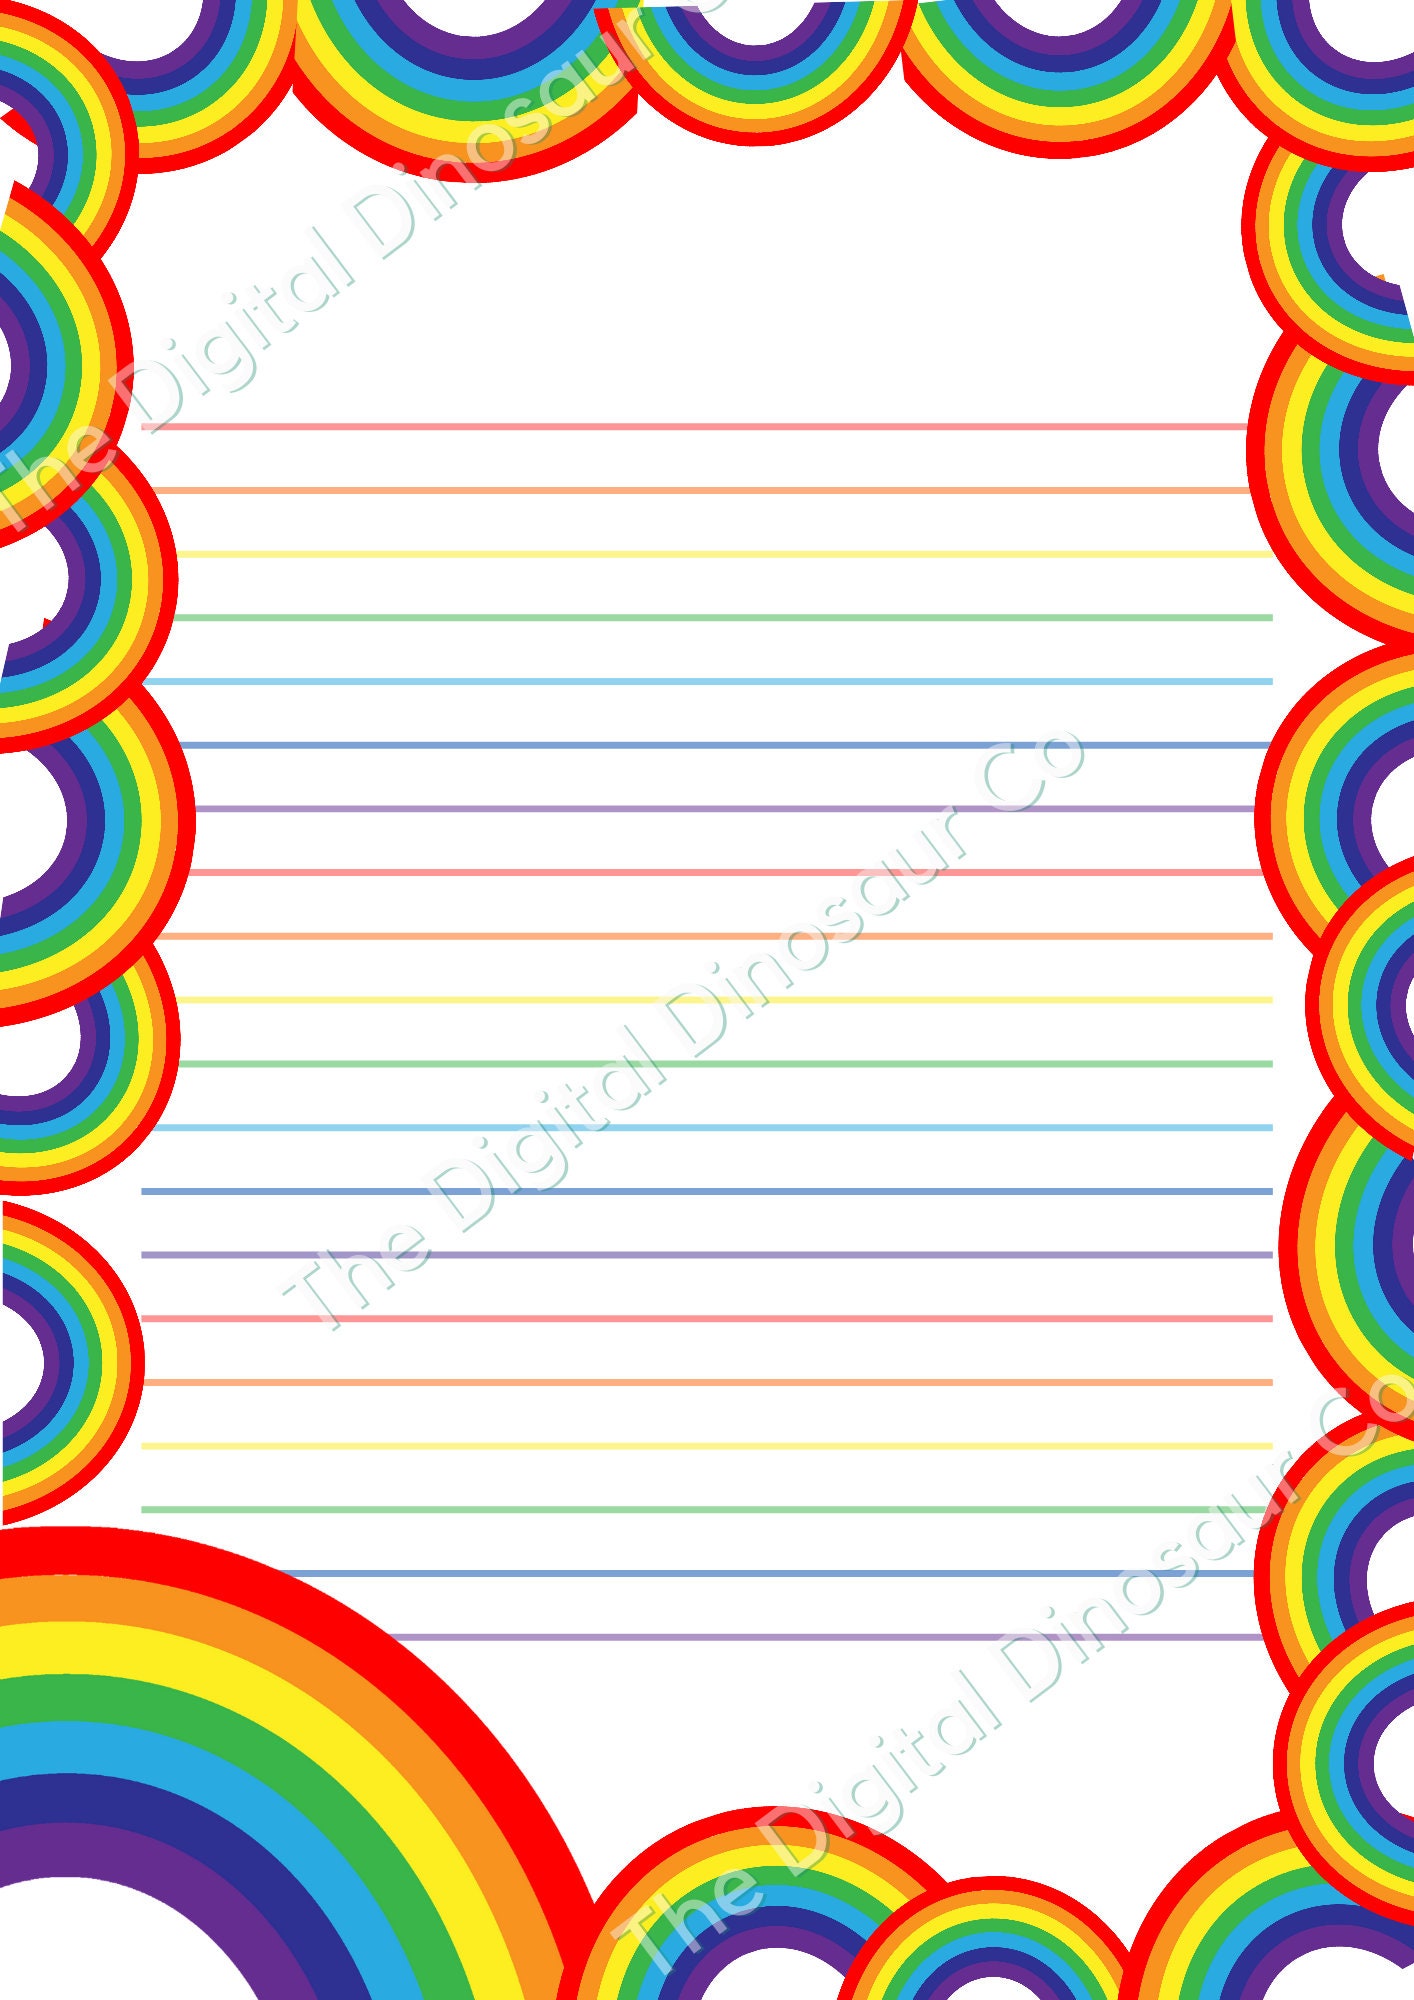  Stationary Paper Decorative Paper Invitation Paper for Printer  Designer Paper Design Paper Computer Printer Paper School Paper Decorative  Printer Paper Letterhead Paper Rainbow Stationary 100 Sheets : Arts, Crafts  & Sewing